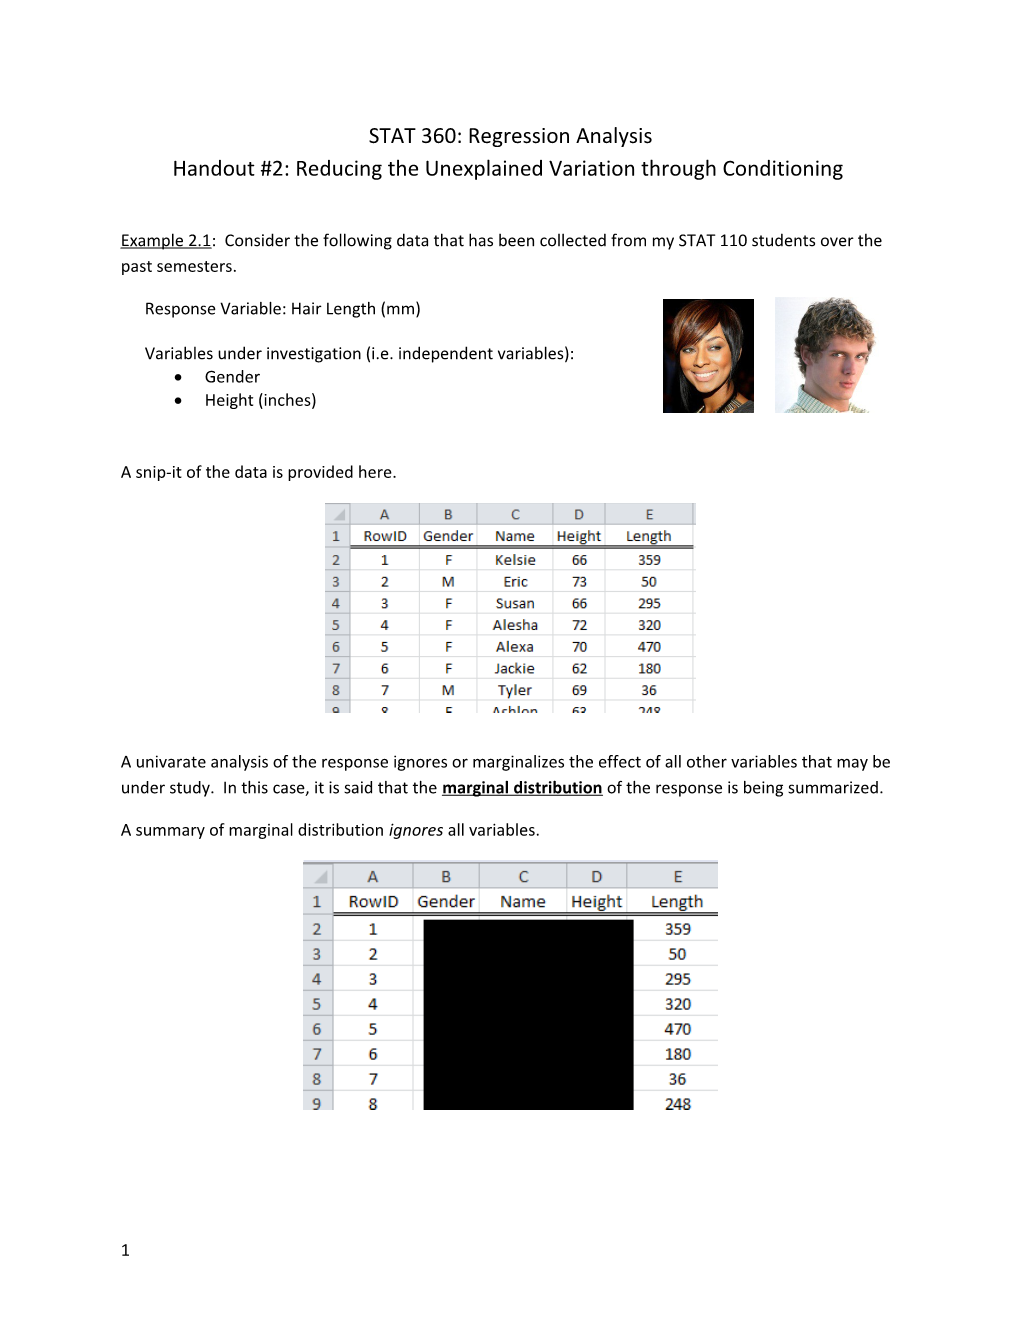 STAT 360: Regression Analysis Handout #2: Reducing the Unexplained Variation Through